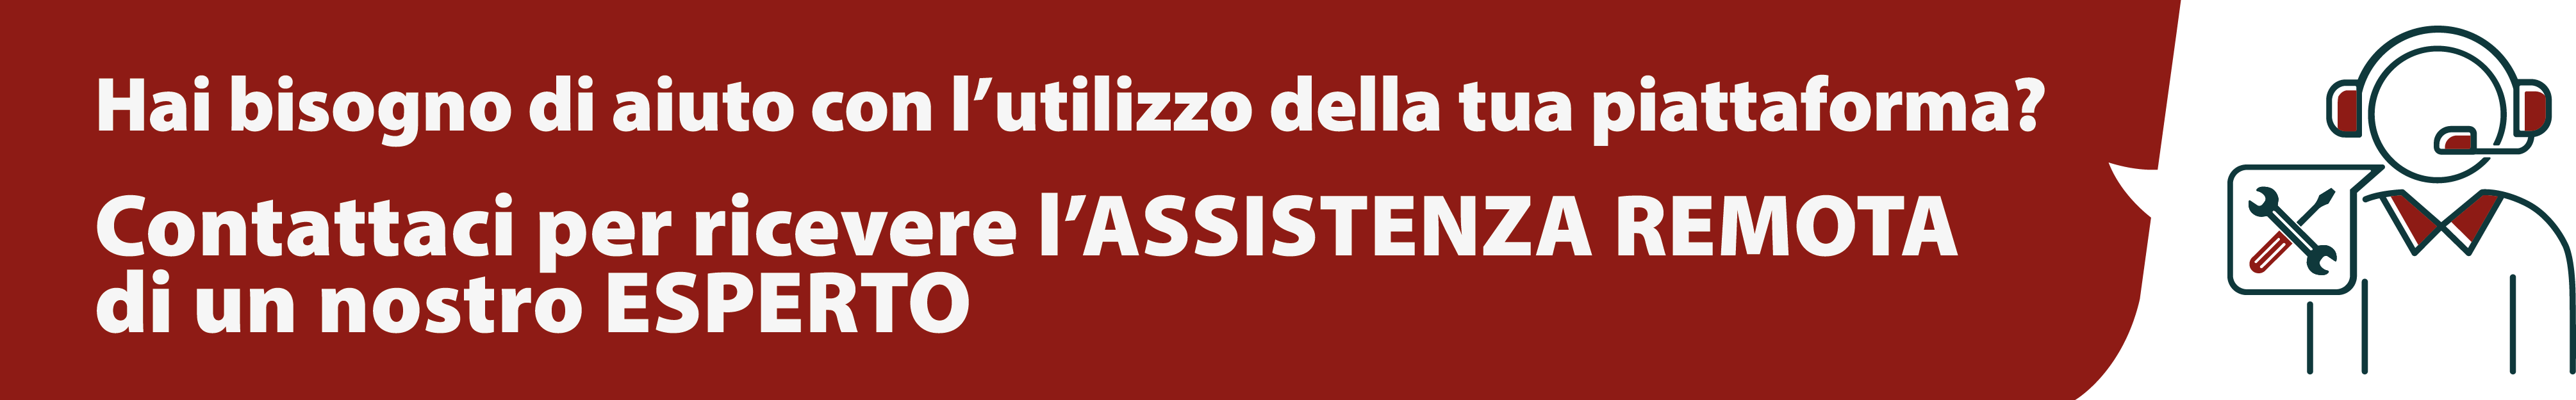 Assistenza SMS/EMAIL/LANDING-PAGE Remota